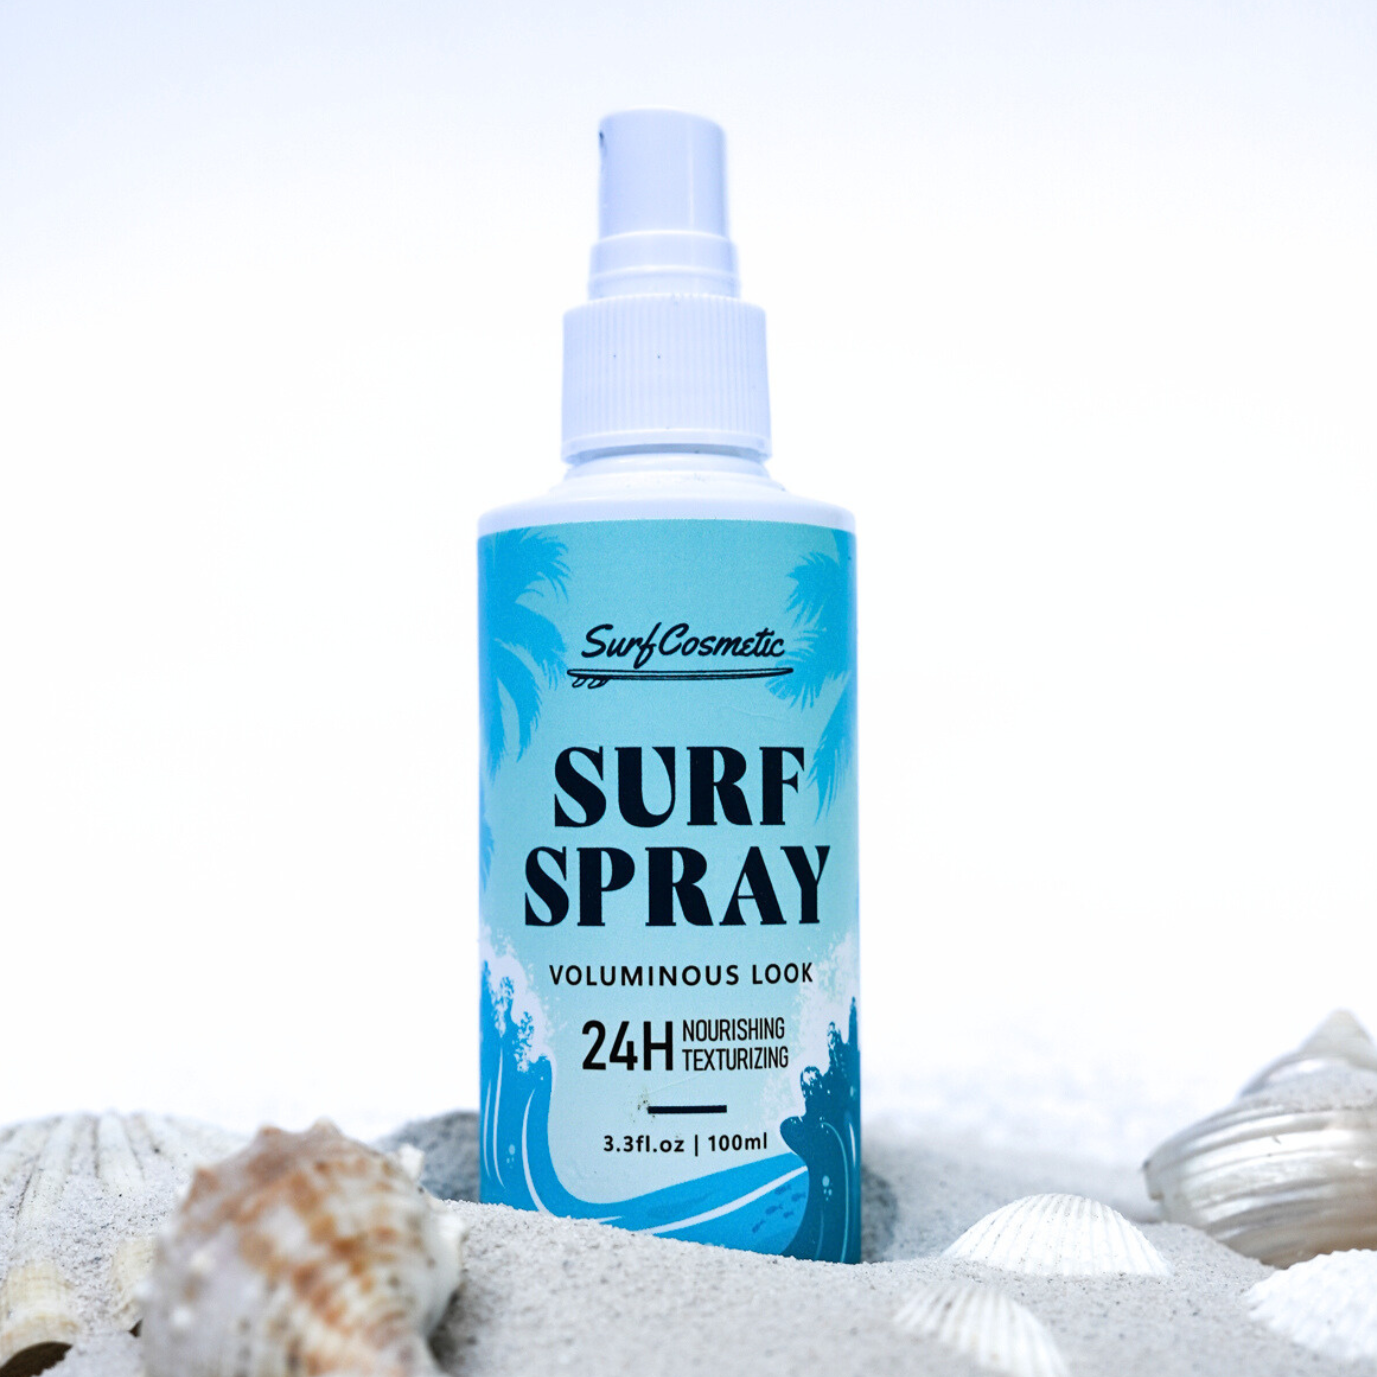 The OG Surf spray 🌊 this spray gives you texture and volume for